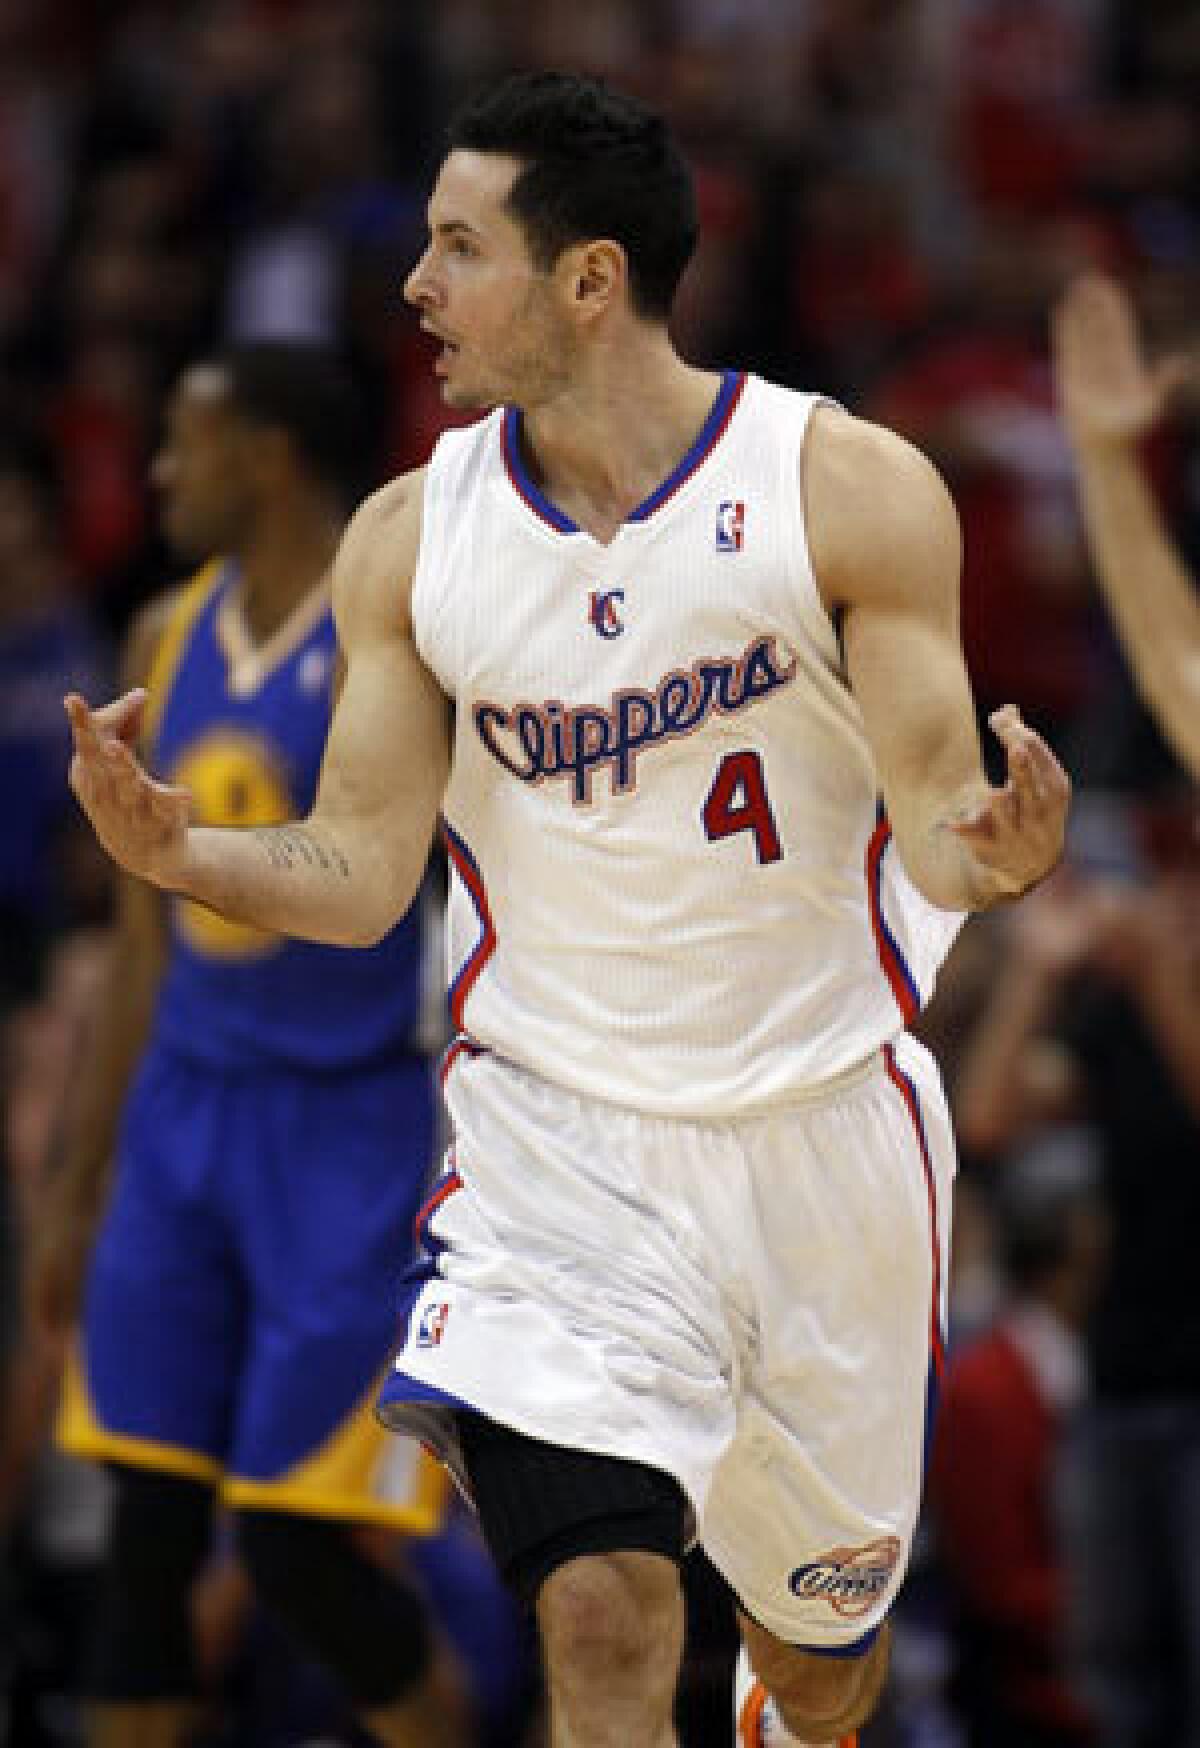 J.J. Redick is averaging 17.3 points per game for the Clippers this season.